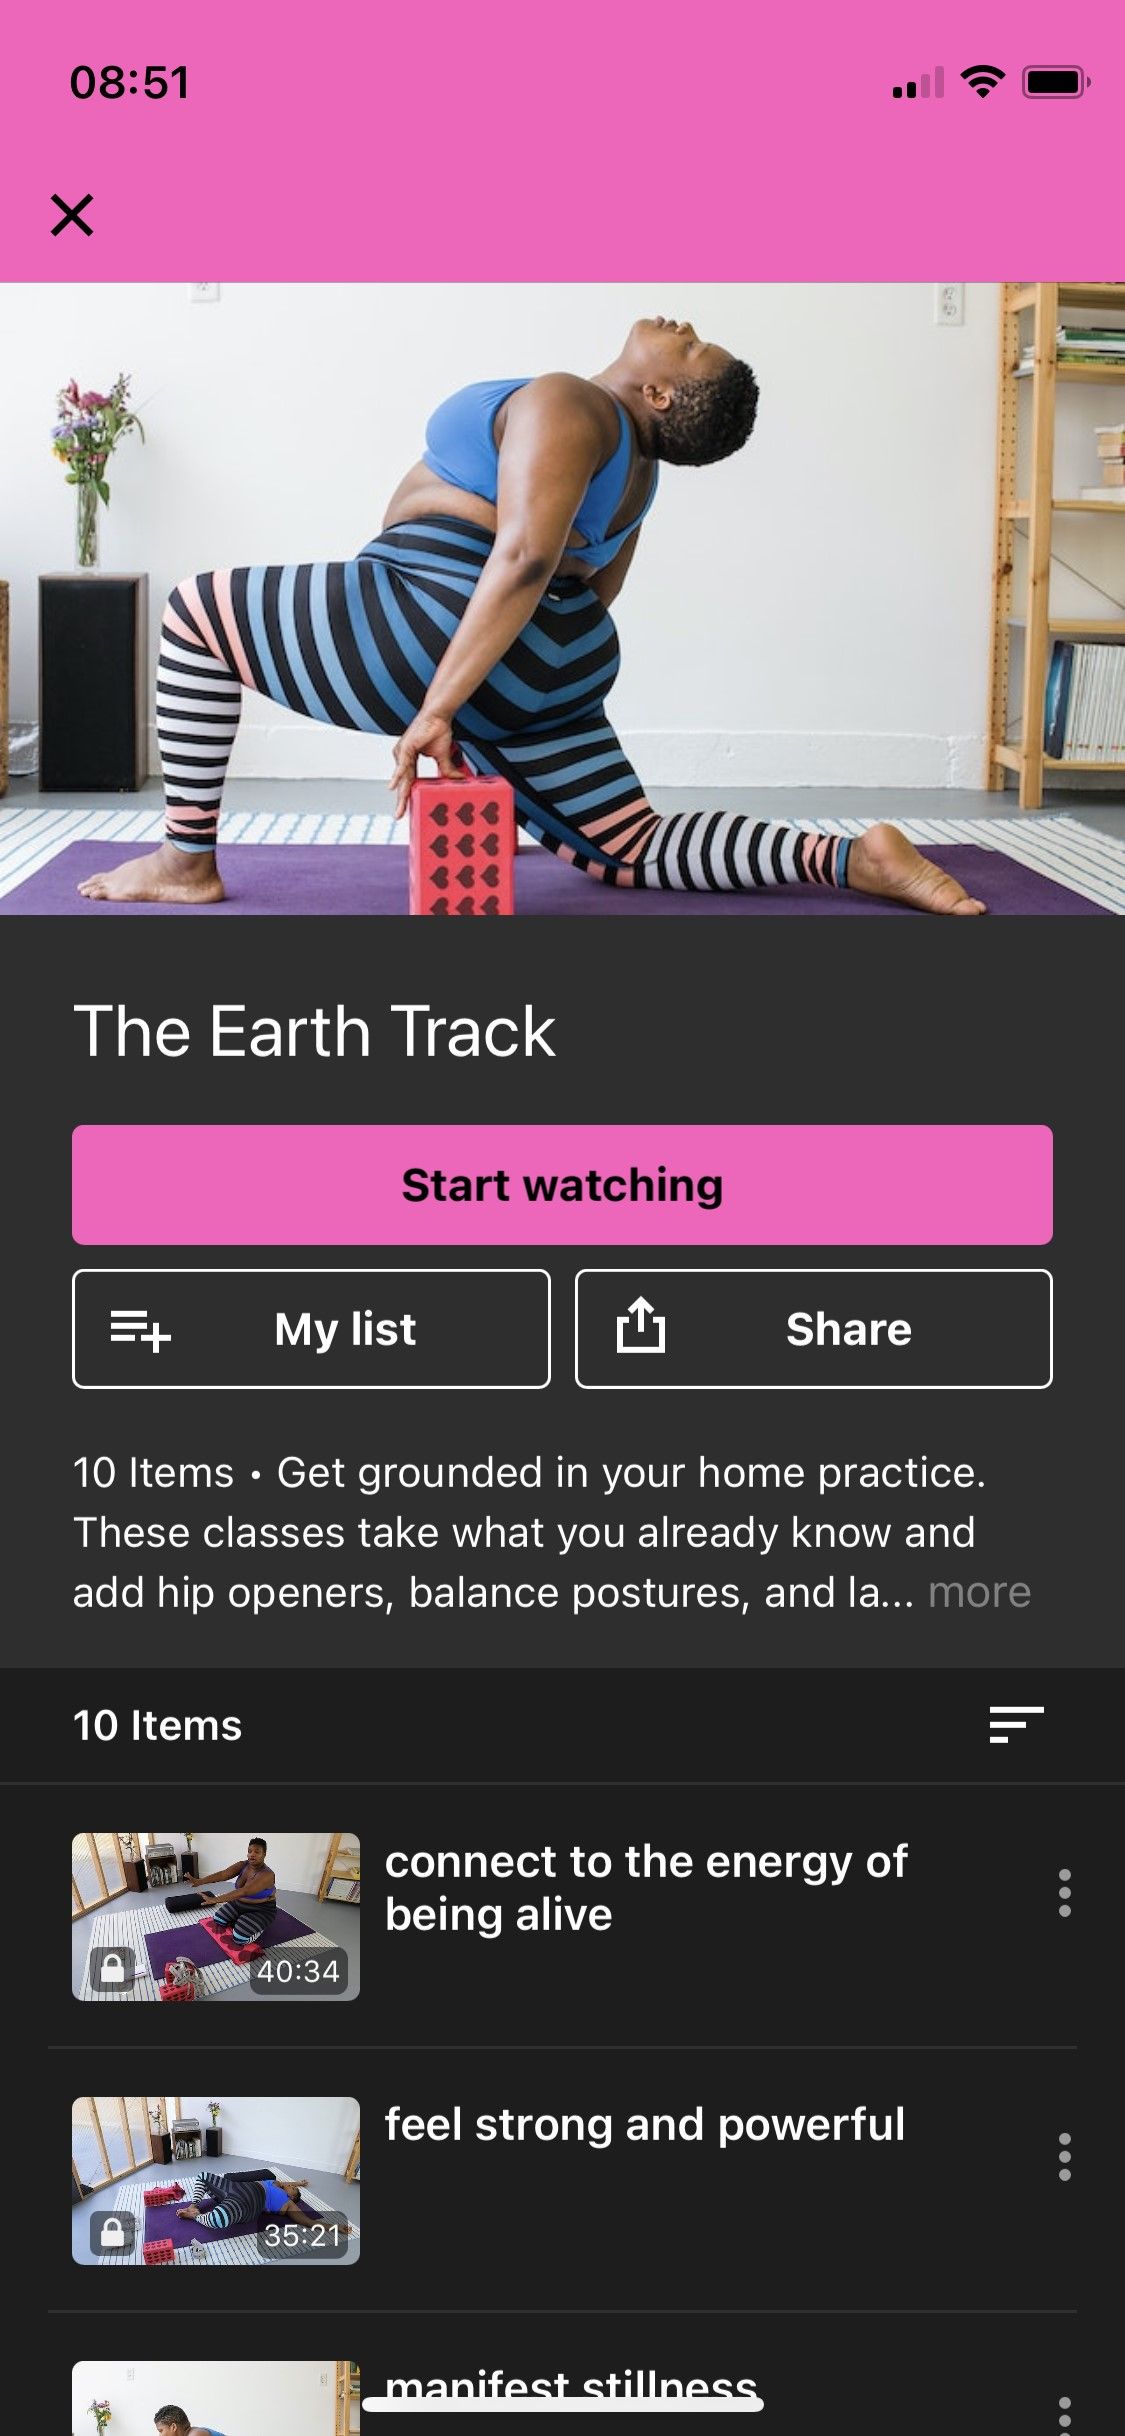 The Underbelly Yoga App screenshot - a safe space for all bodies